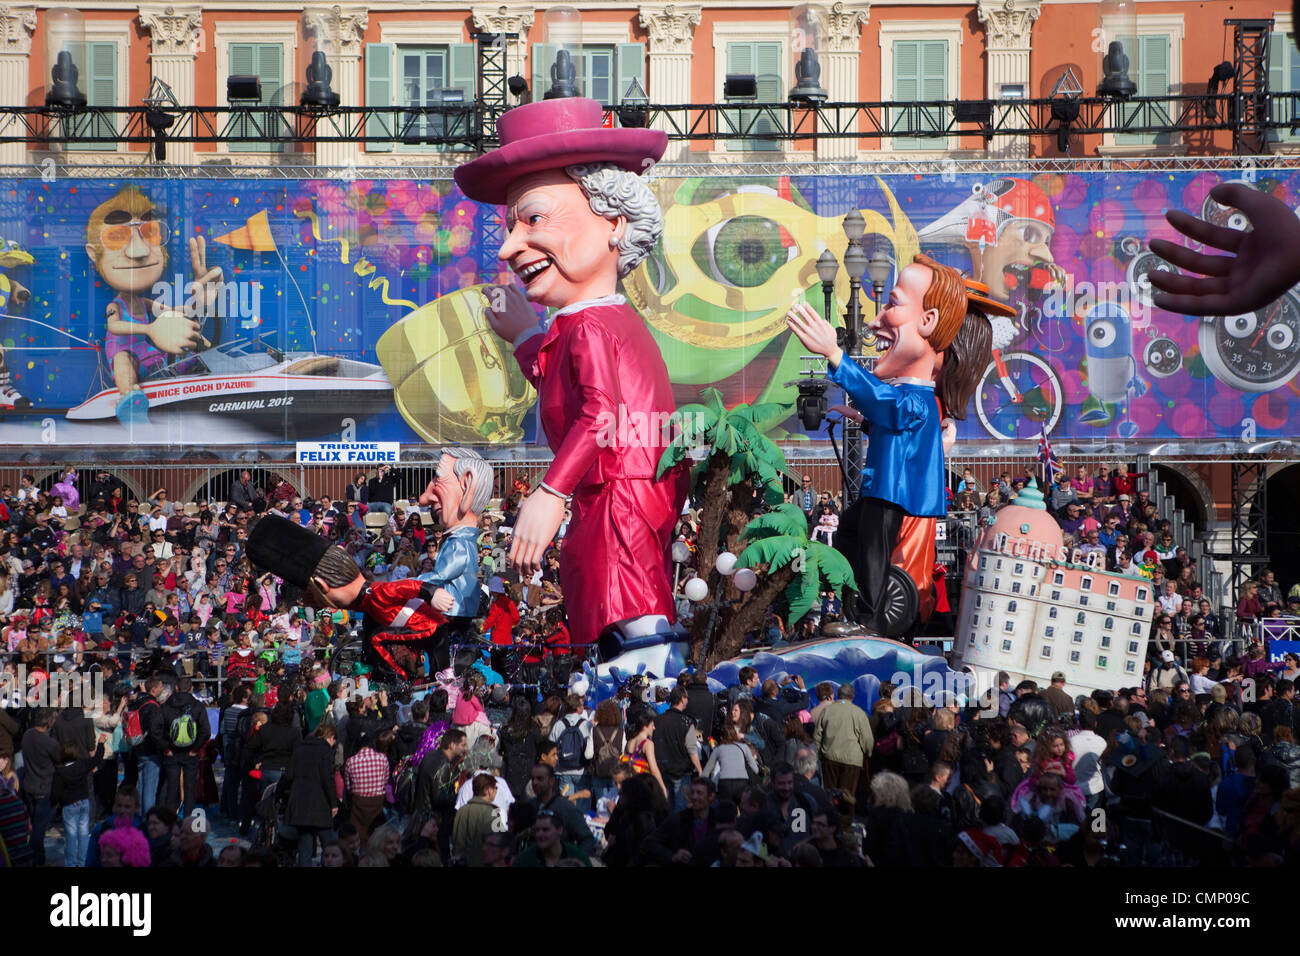 Carnaval de Nice 2012. cartoon effigy of HM Queen Elizabeth 2nd during  Carnival parade. 124406 Nice Carnival Stock Photo - Alamy